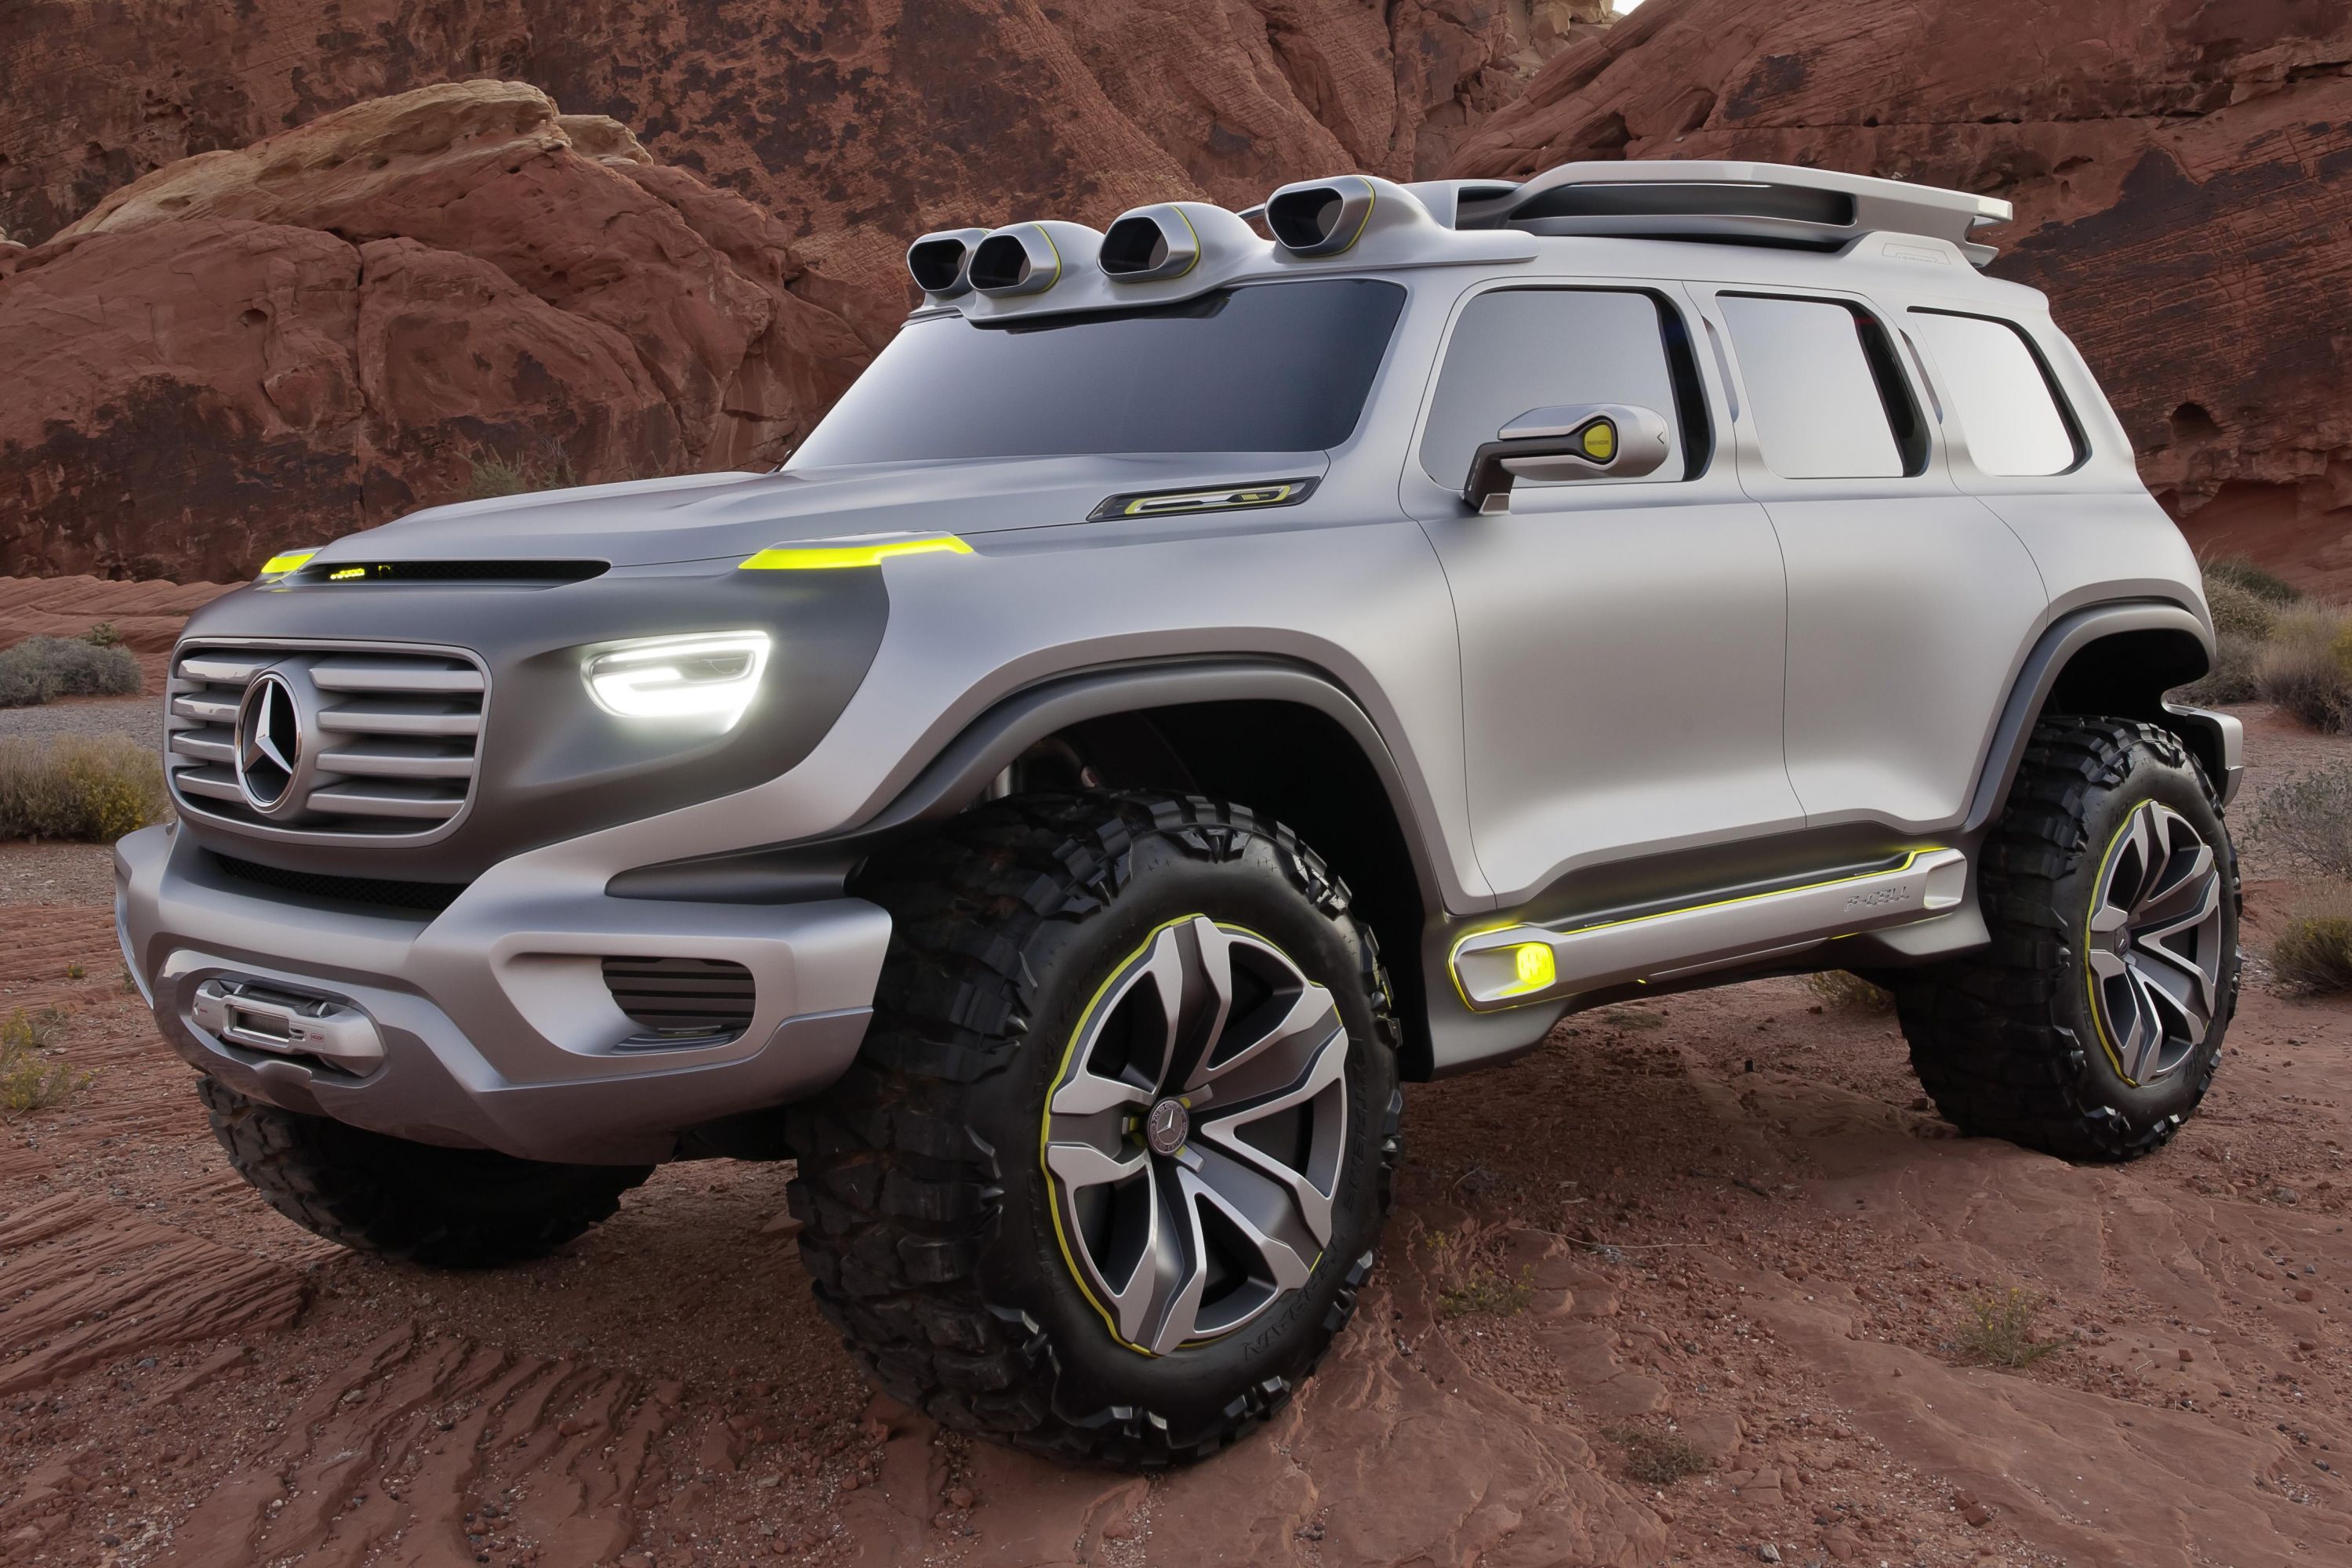 Mercedes-Benz 'Mini-G' crossover launching in 2026 – report